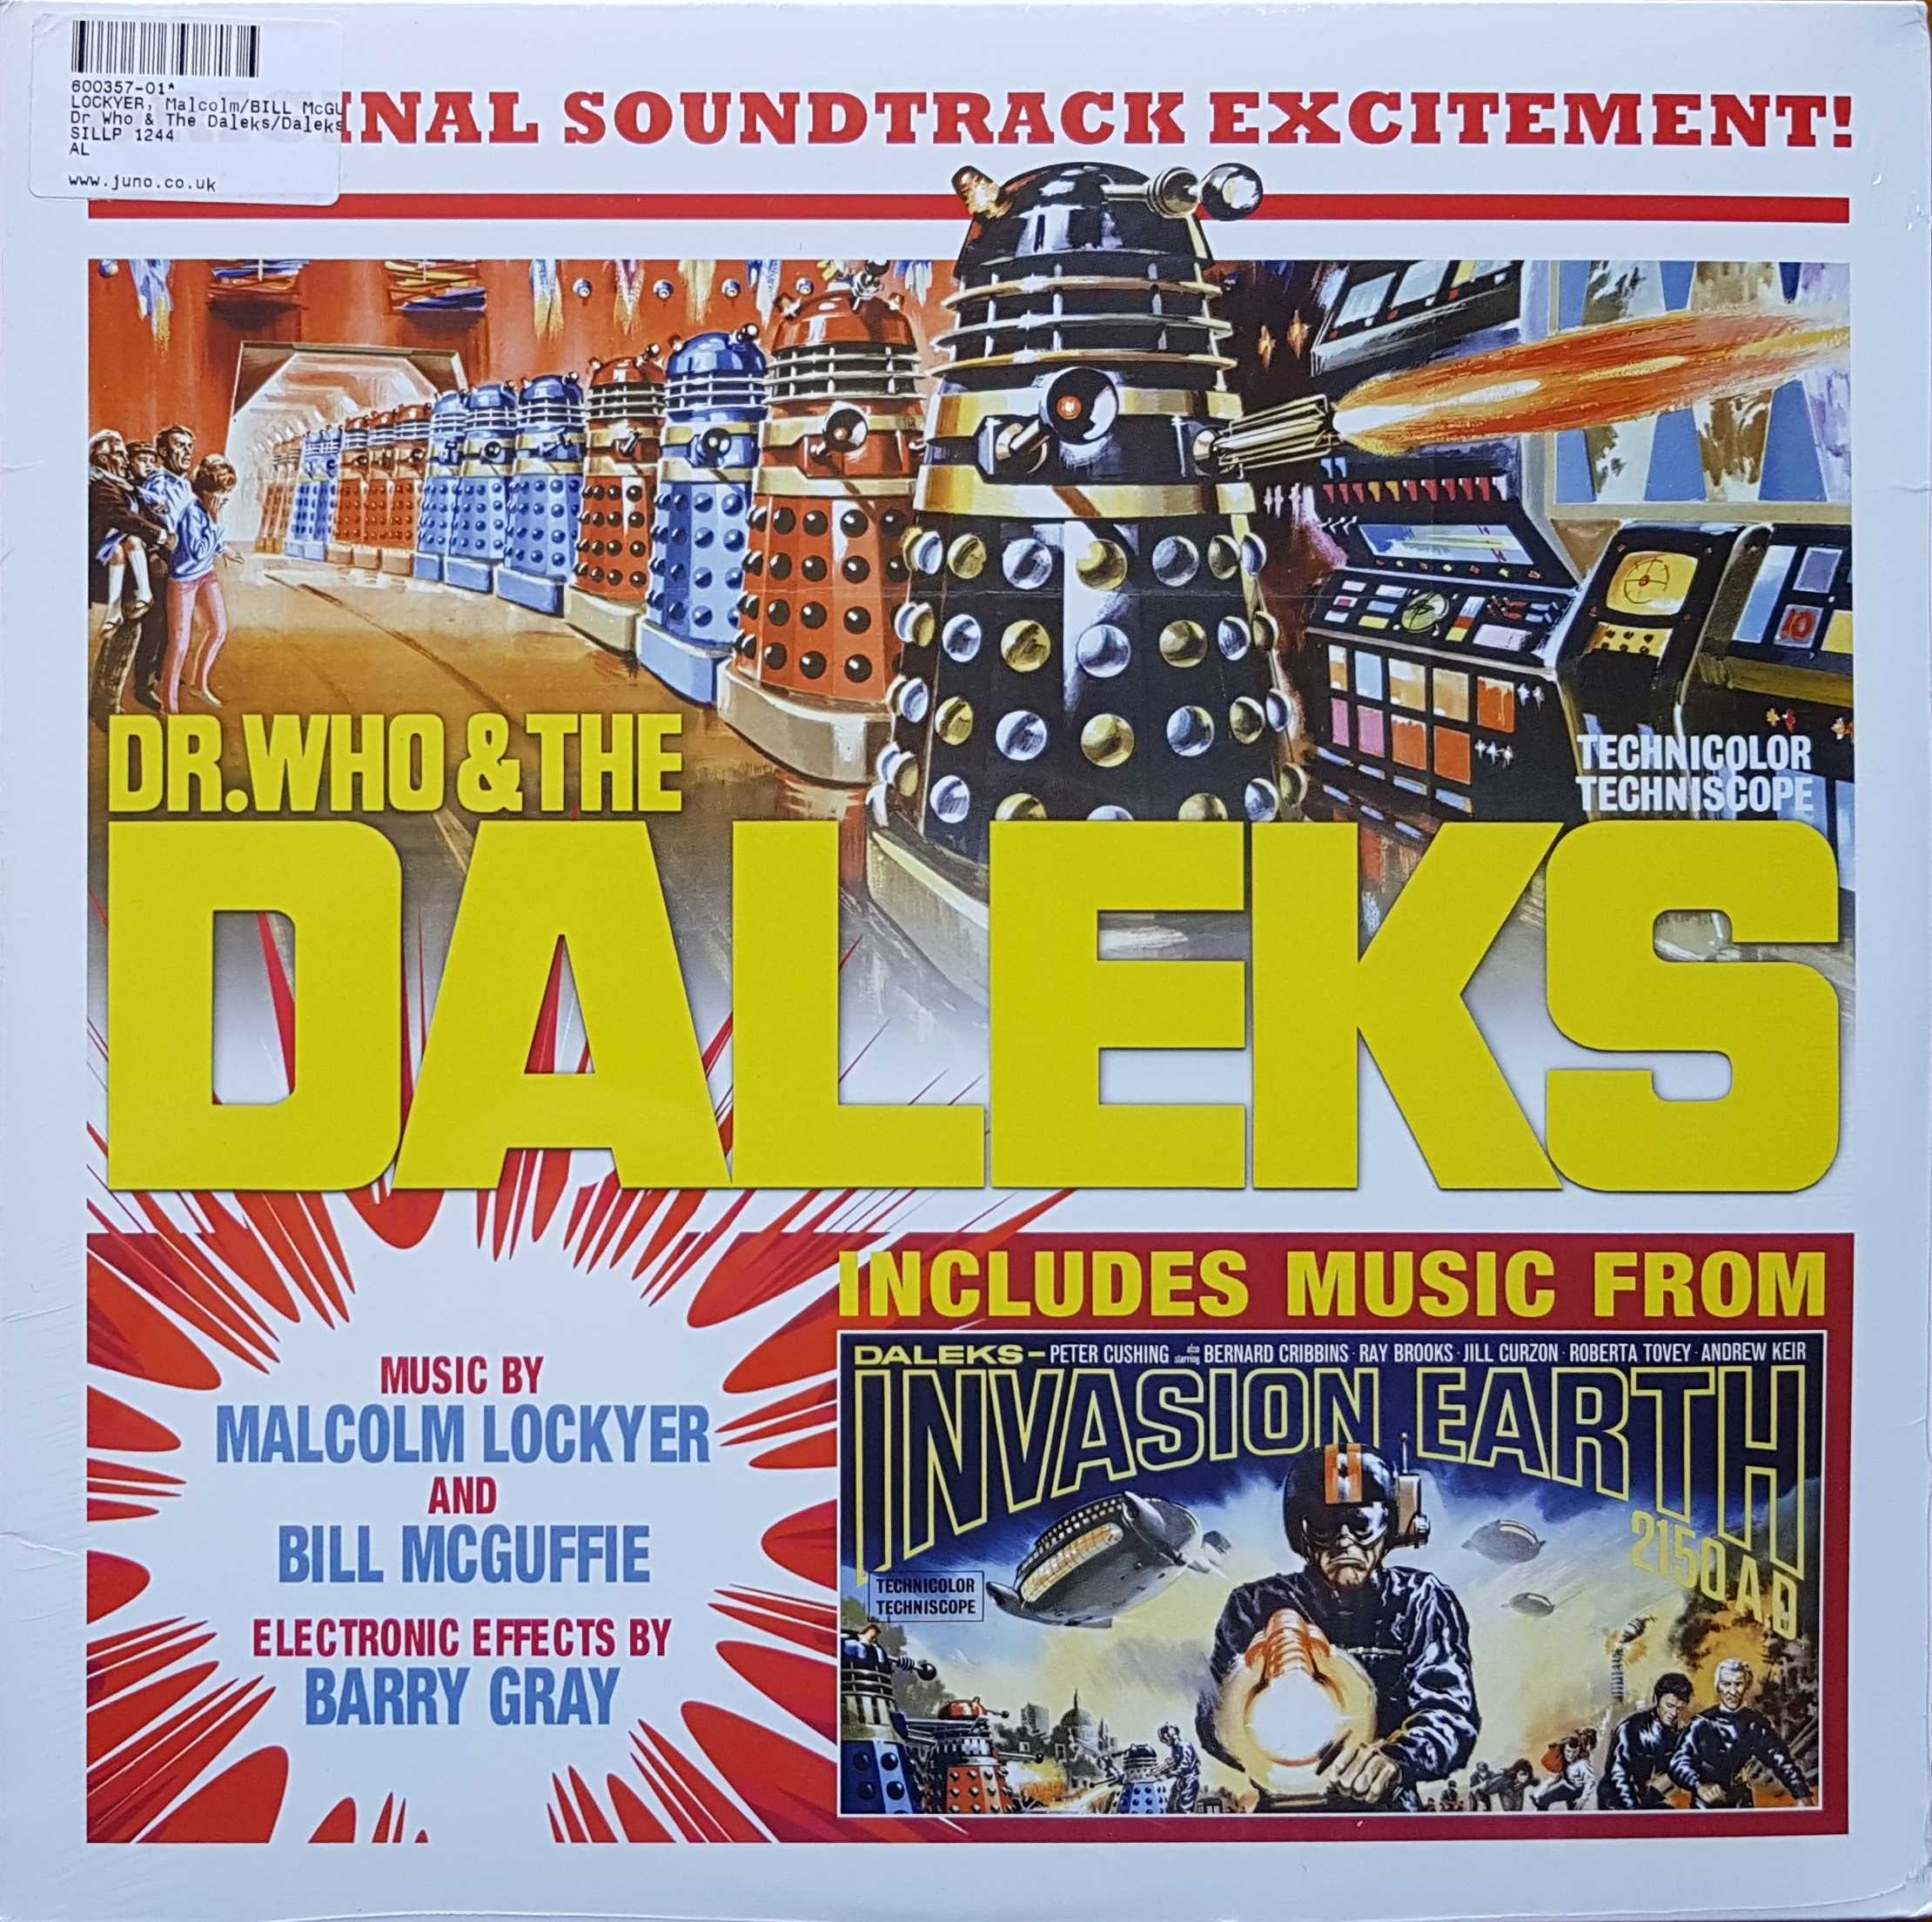 Picture of SILLP 1244 Doctor Who and the Daleks / Daleks invasion Earth 2150 AD - Record Store Day 2016 by artist Malcolm Lockyer / Bill McGuffie / Barry Gray from the BBC records and Tapes library